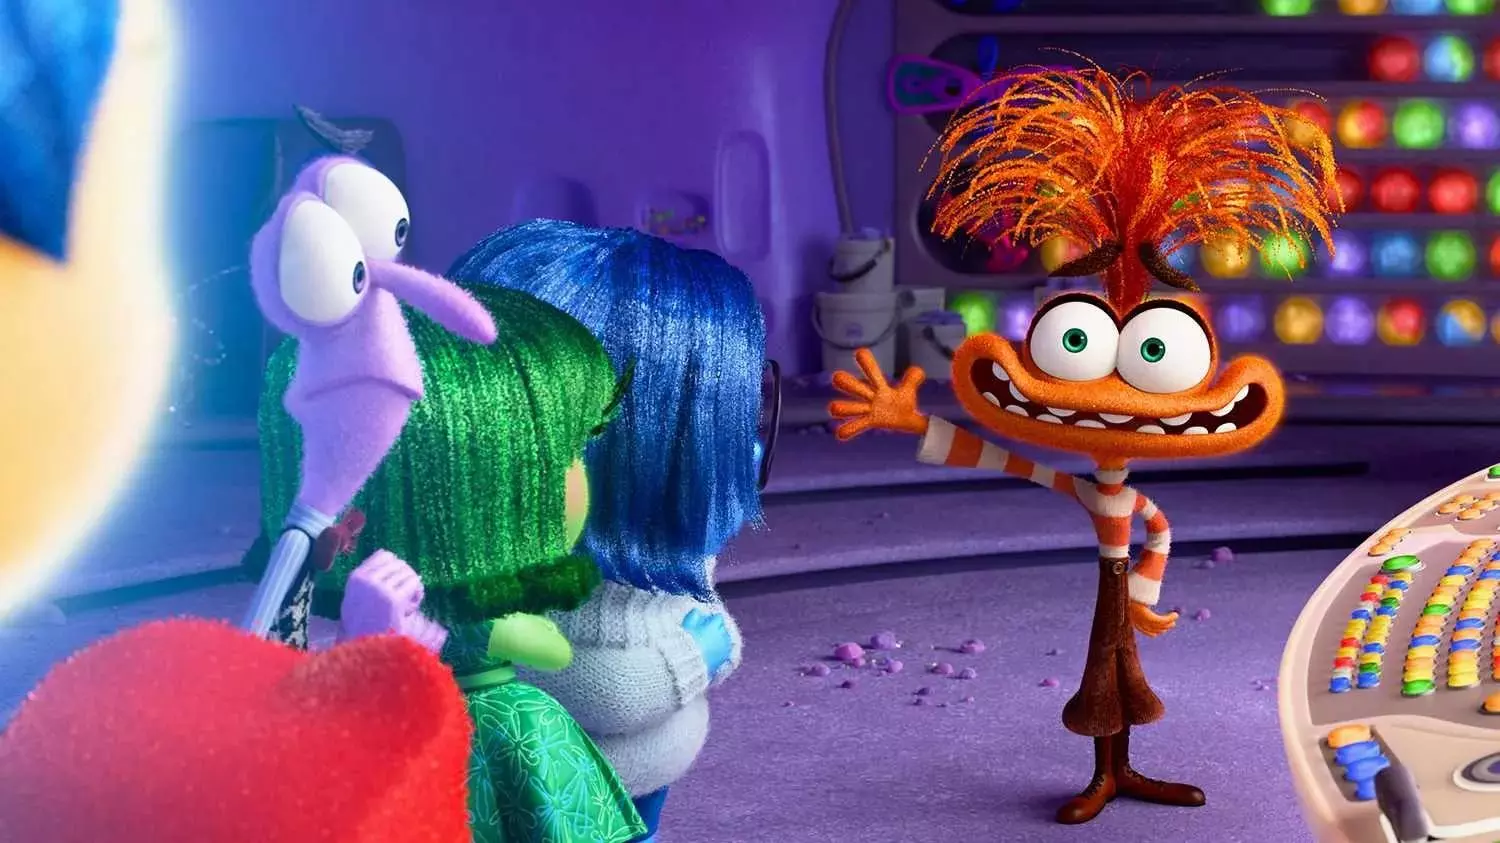 Inside Out 2’s 30-Minute Preview Excites Fans And Critics, Calling It As ‘A Perfect Sequel’